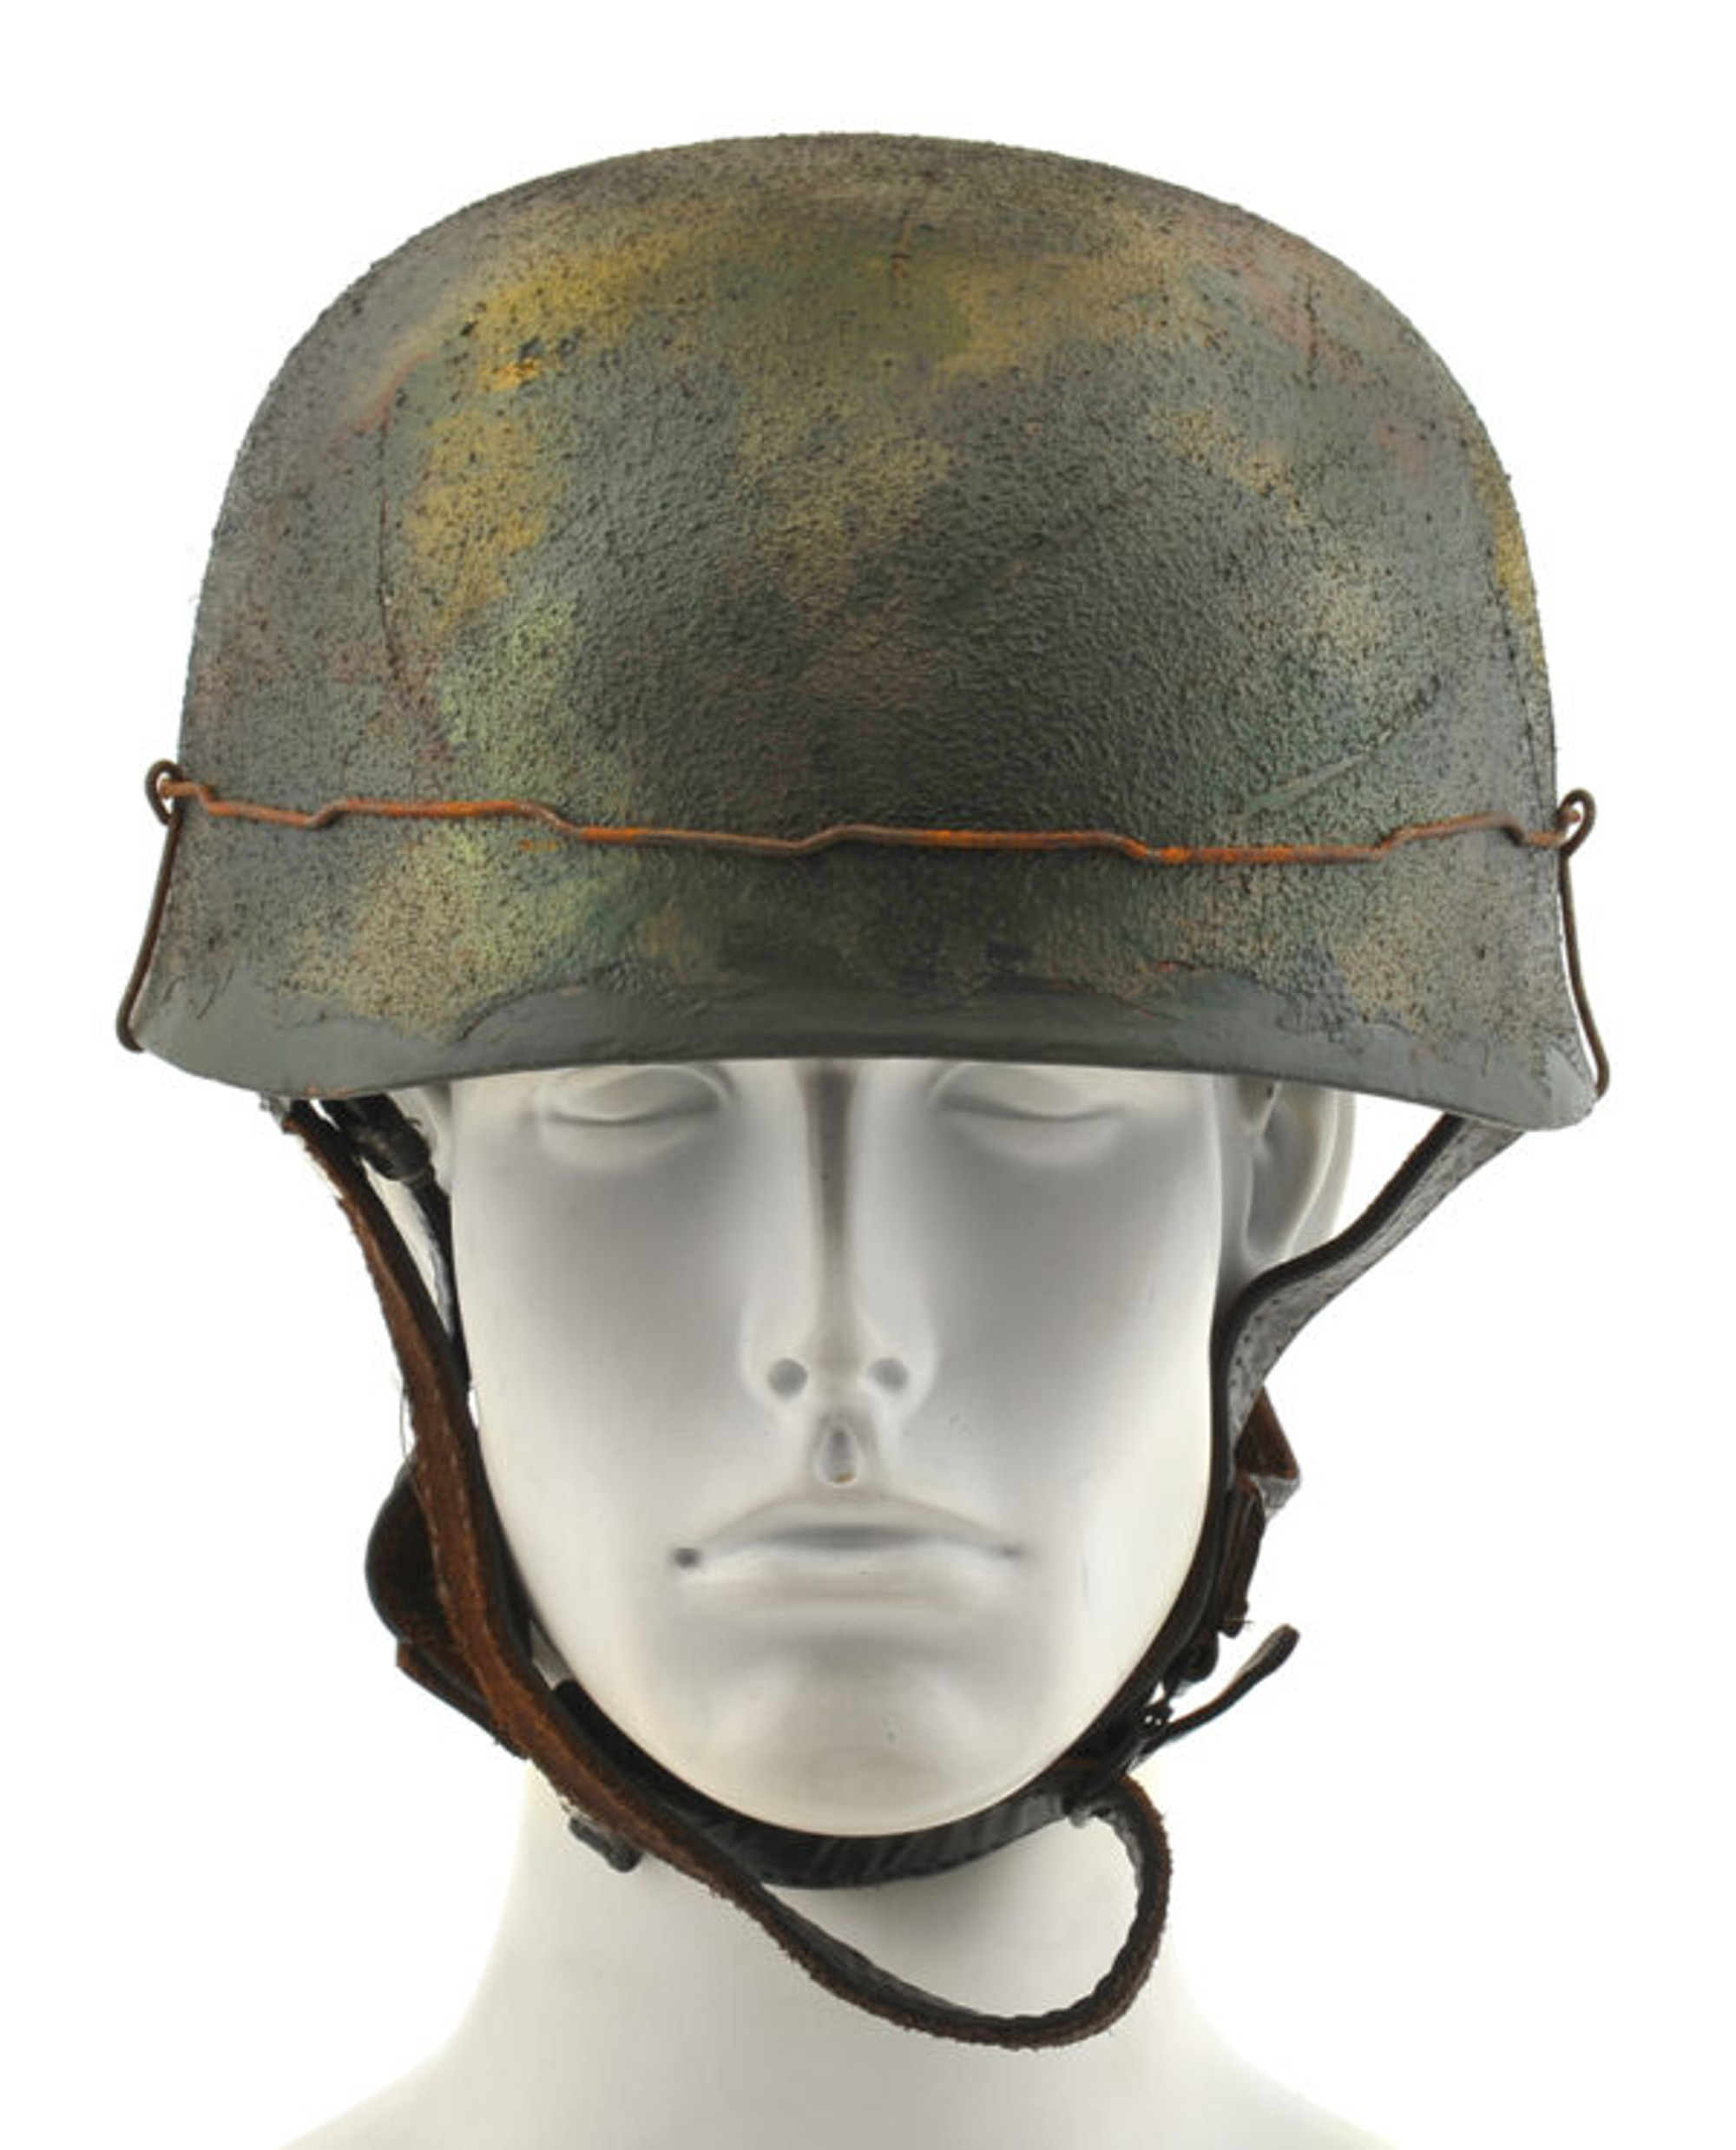 German WW2 Paratrooper M38 Fallschirmjager Helmet Multi Color Camouflage w/Texture Wire & Decal Normandy